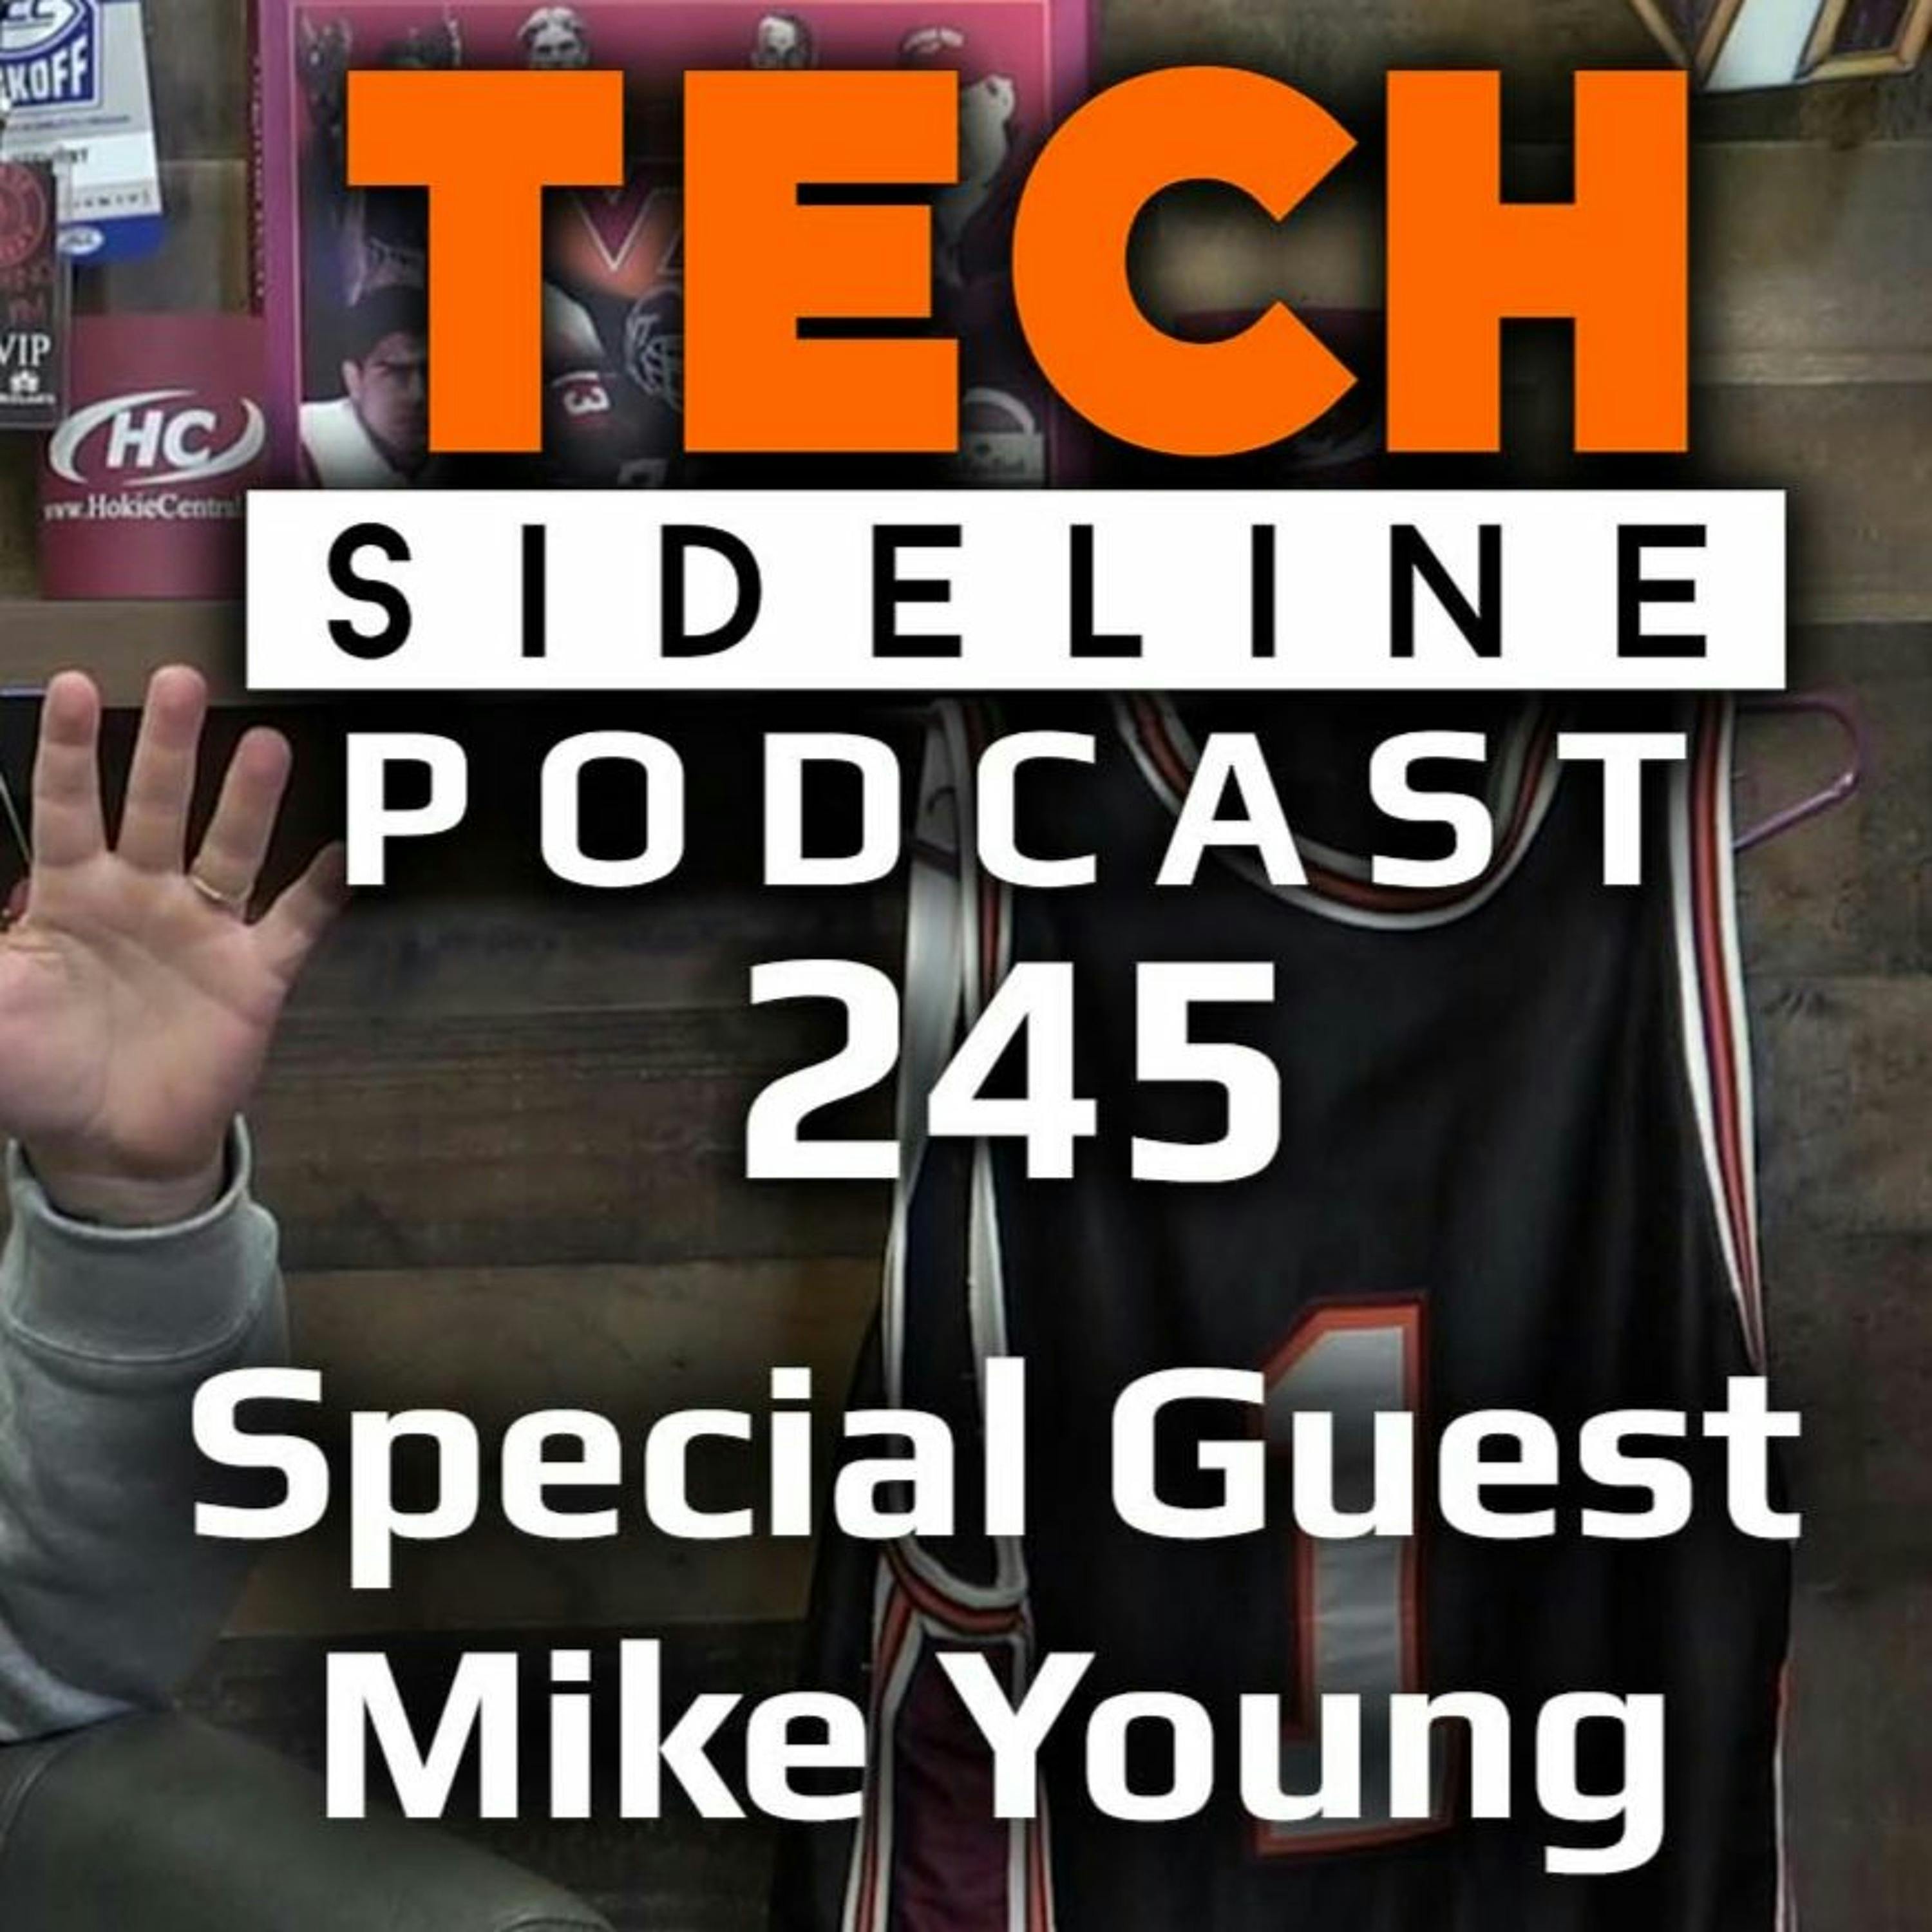 Special Guest Mike Young: TSL Podcast 245